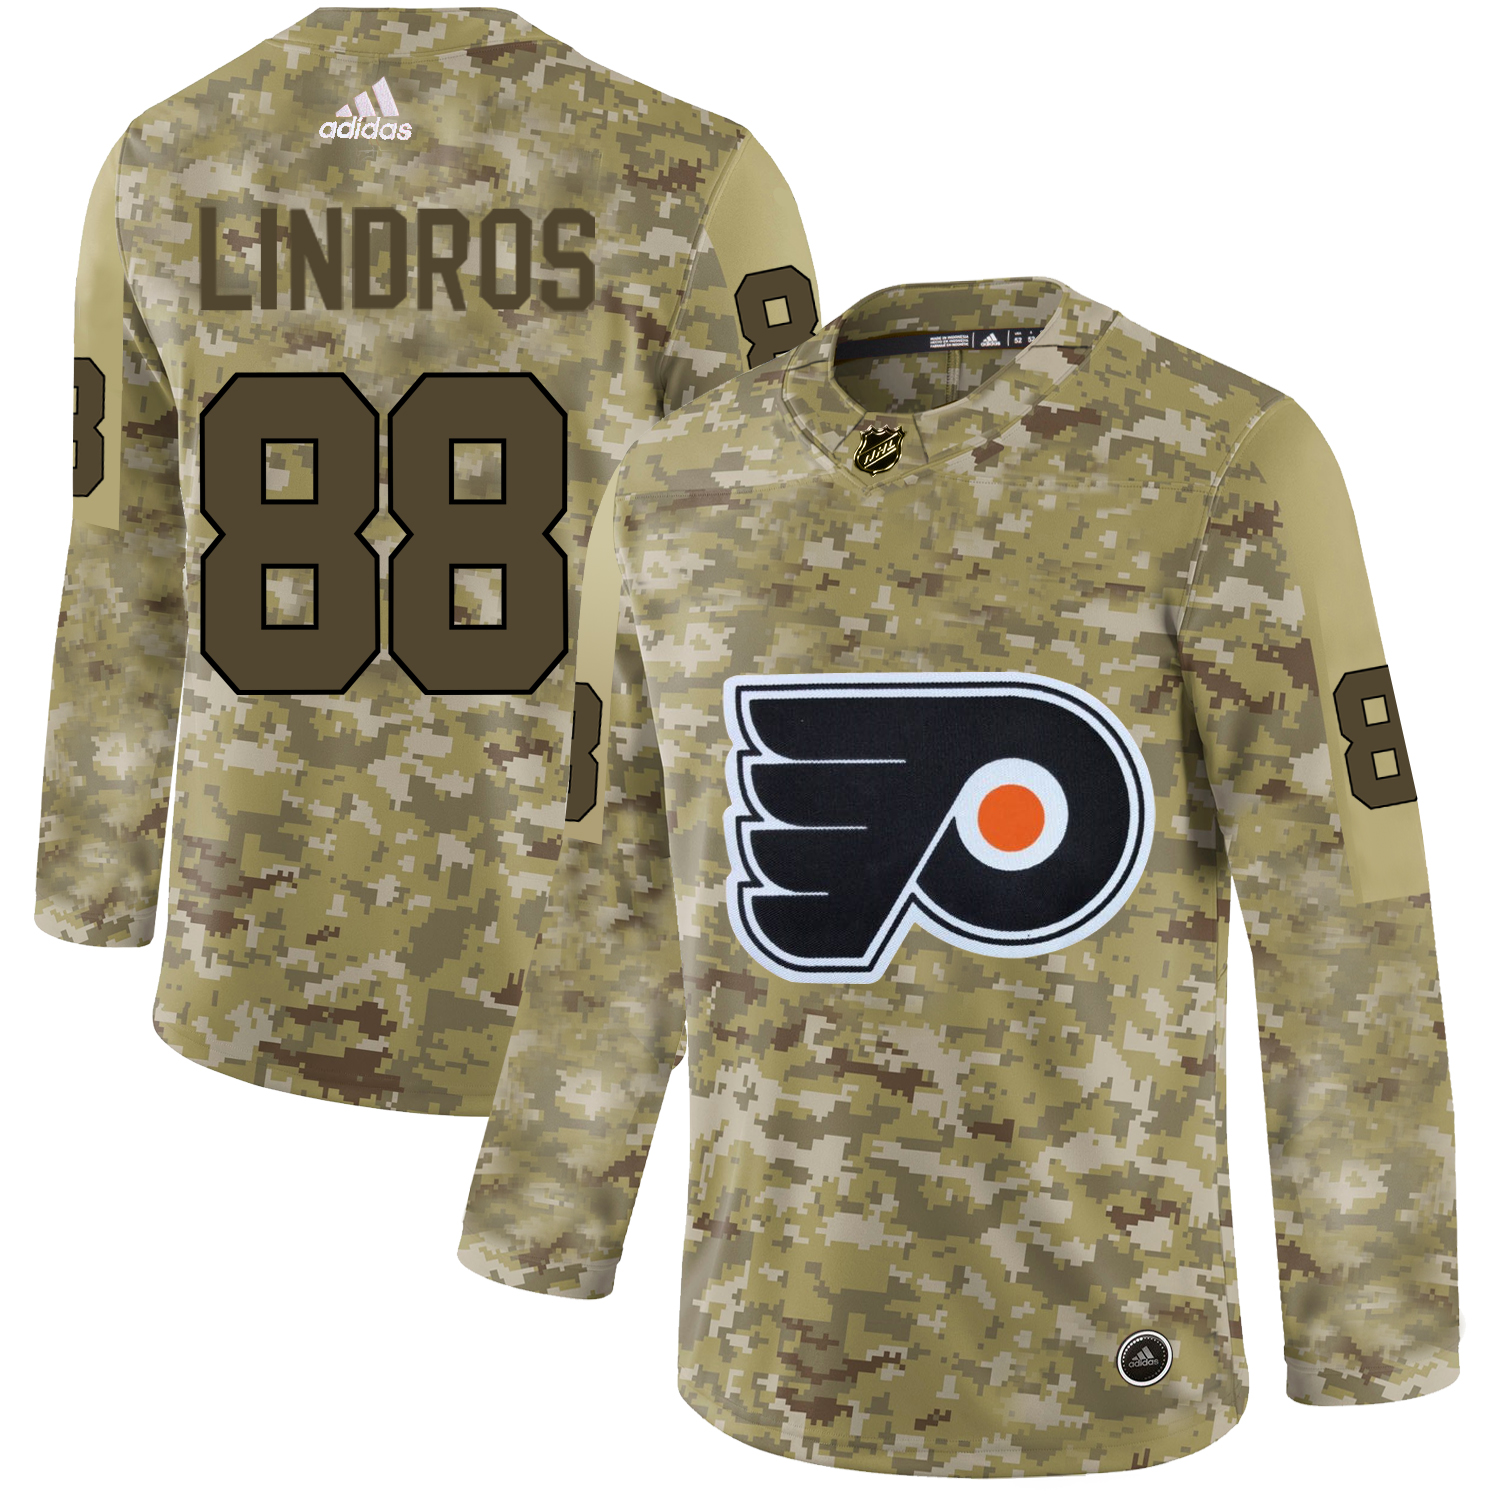 Adidas Flyers #88 Eric Lindros Camo Authentic Stitched NHL Jersey